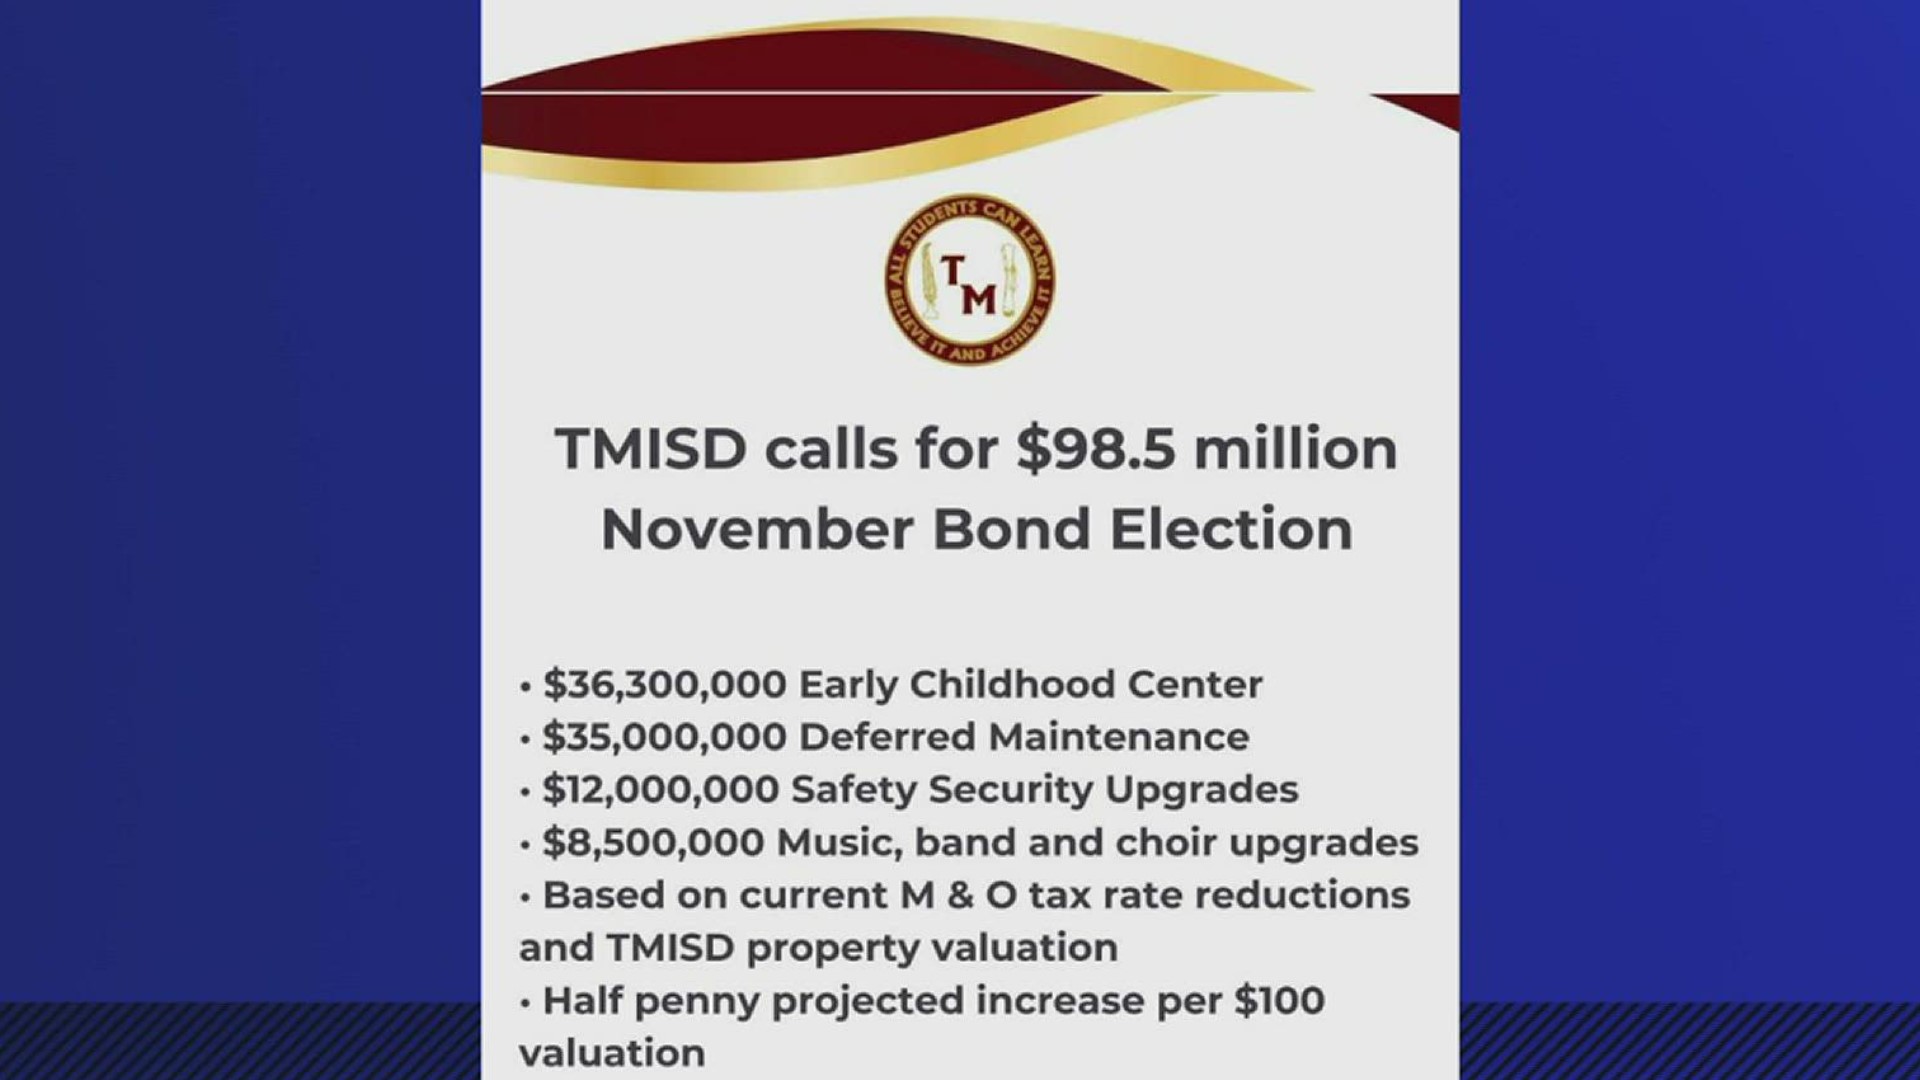 The district wants $36 million for an early childhood development center, $35 million for deferred, $12 million for safety and security.